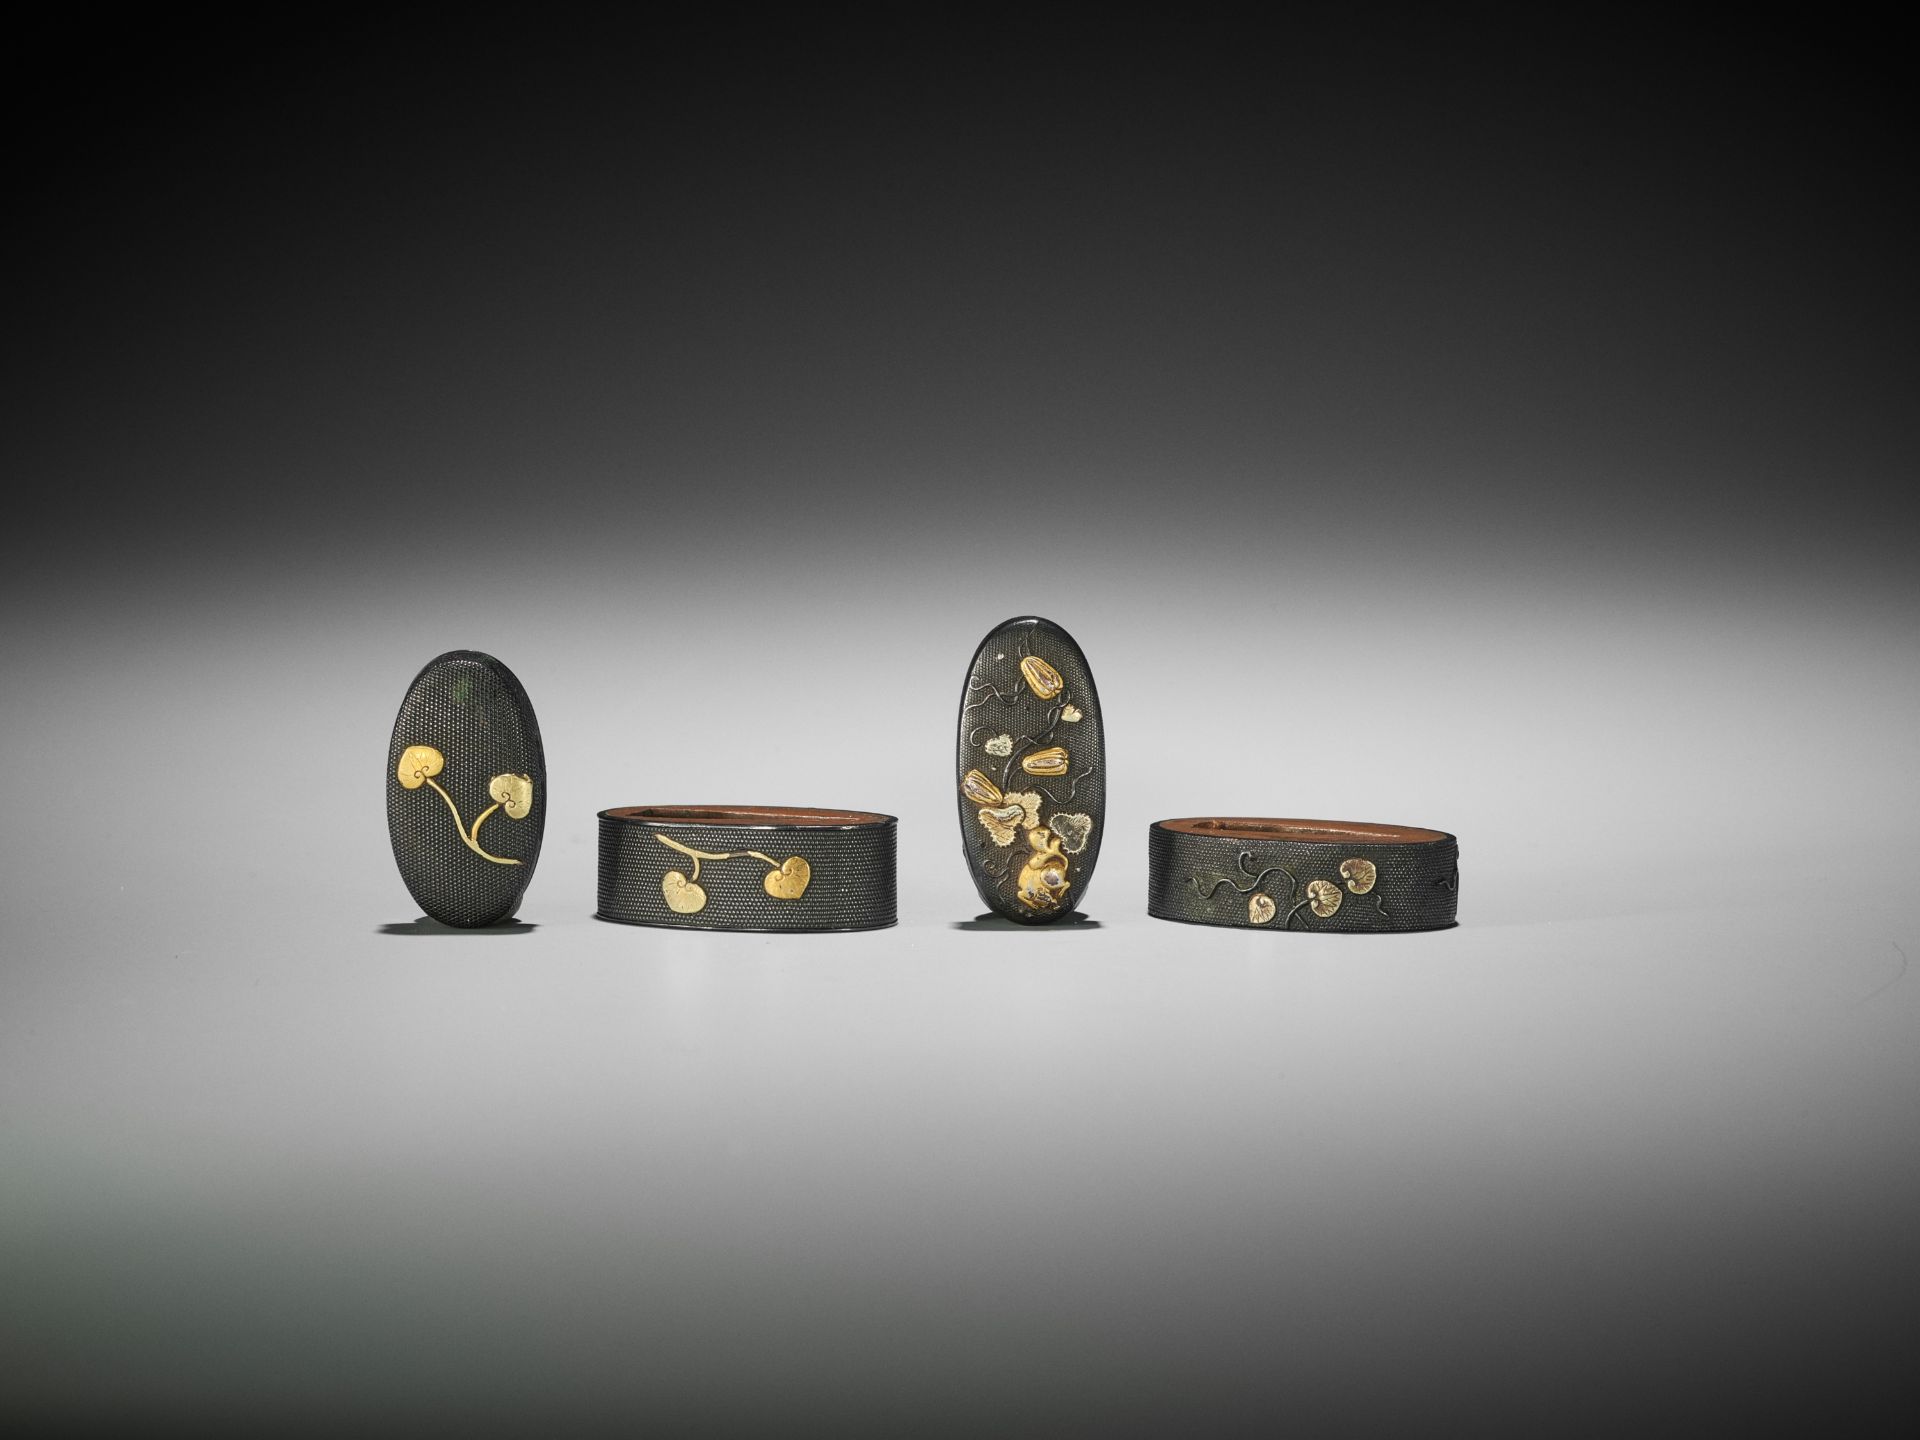 TWO FUCHI AND KASHIRA WITH AOI LEAVES - Image 2 of 4